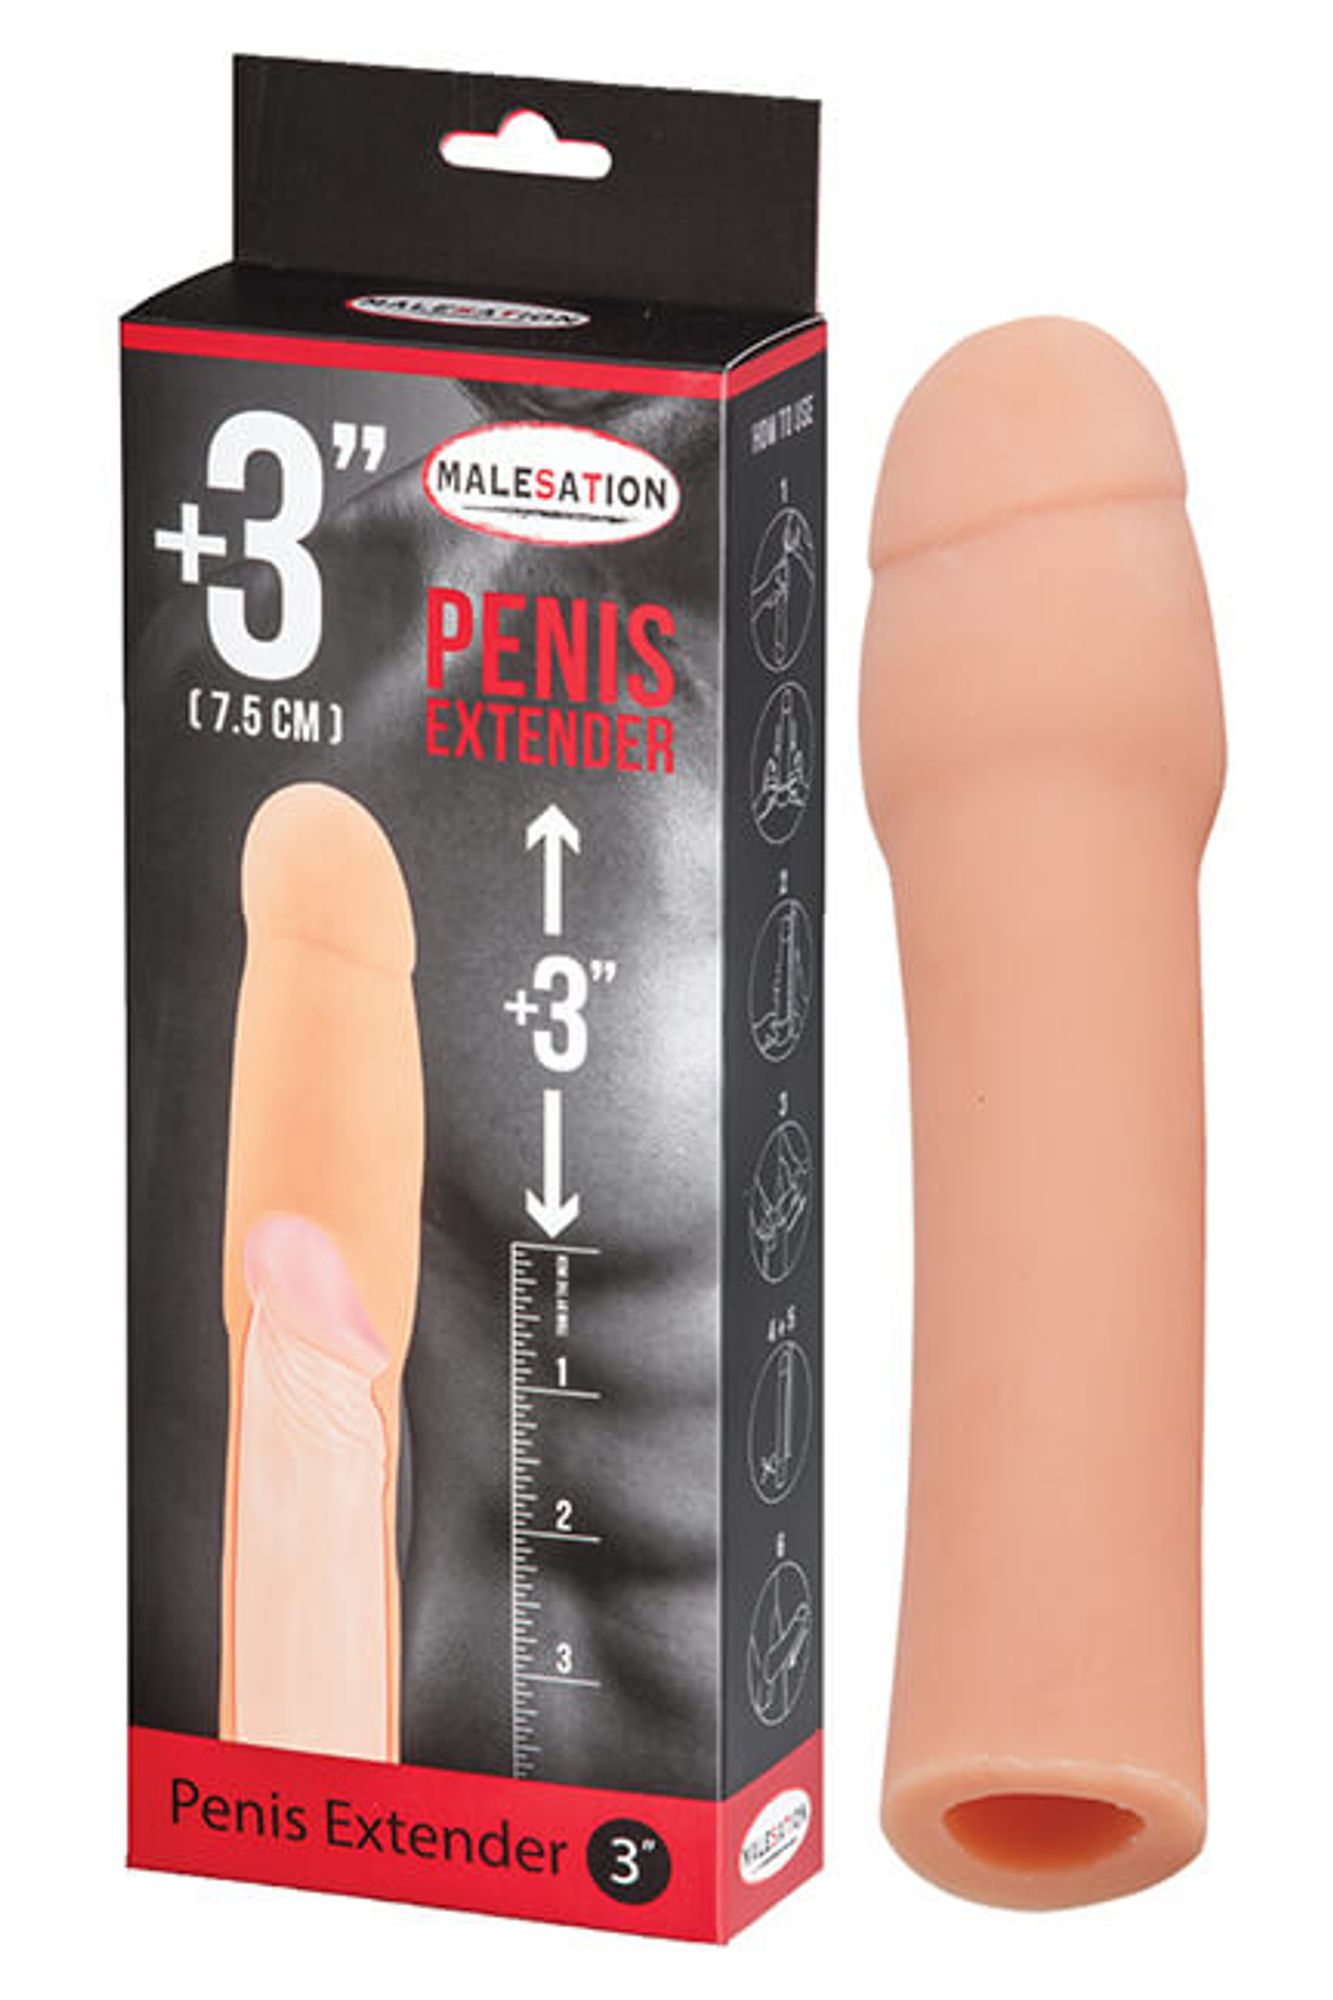 7 by 5 penis